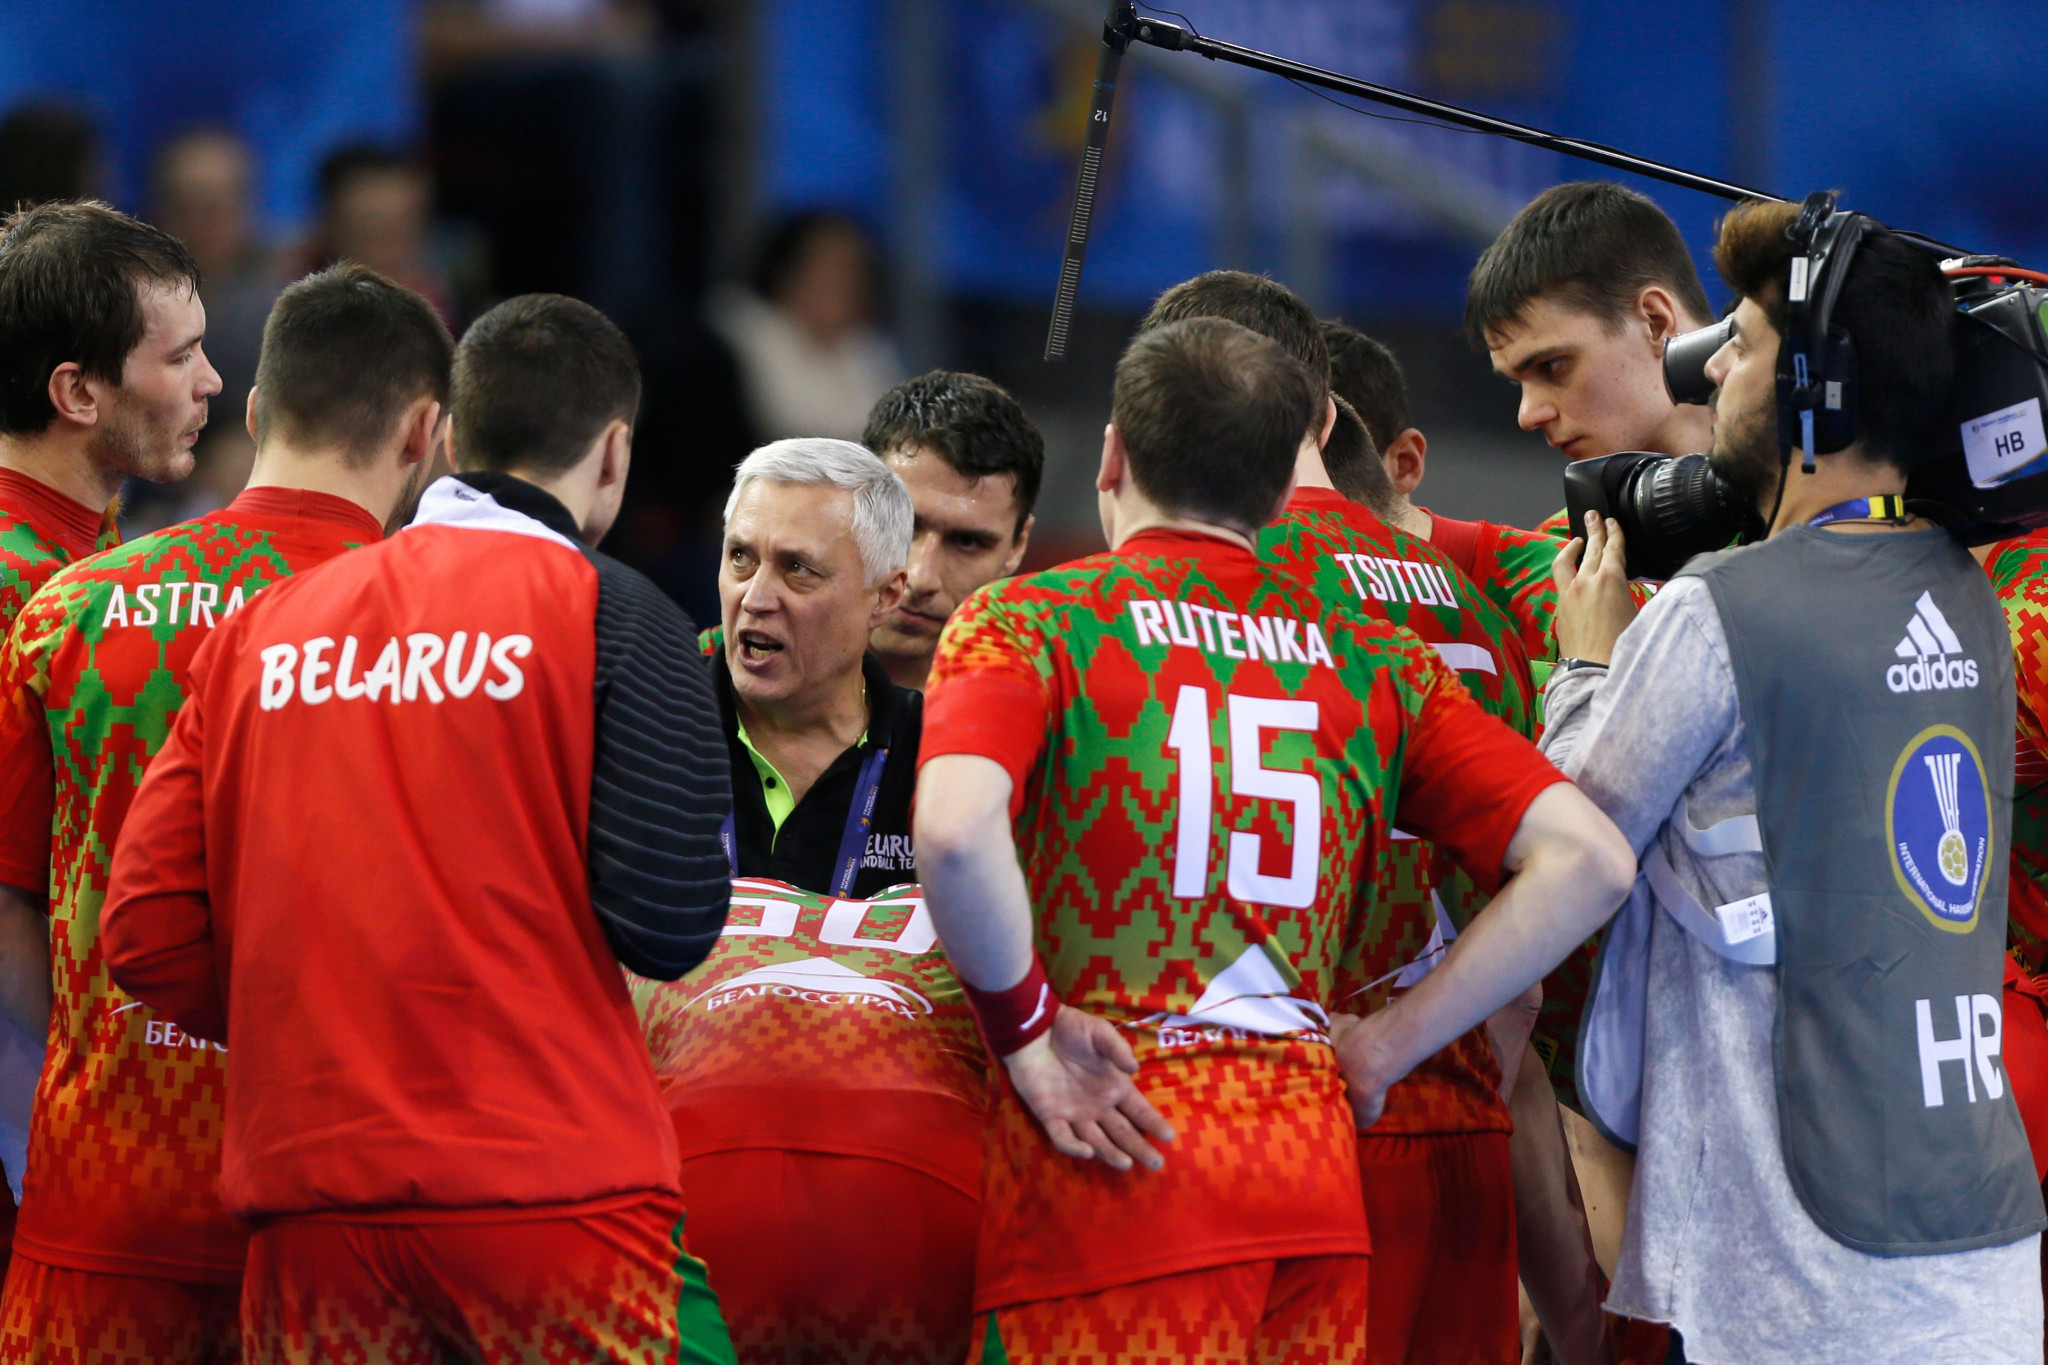 Yuri Shevtsov is the head coach of the Belarus men's team ©Getty Images